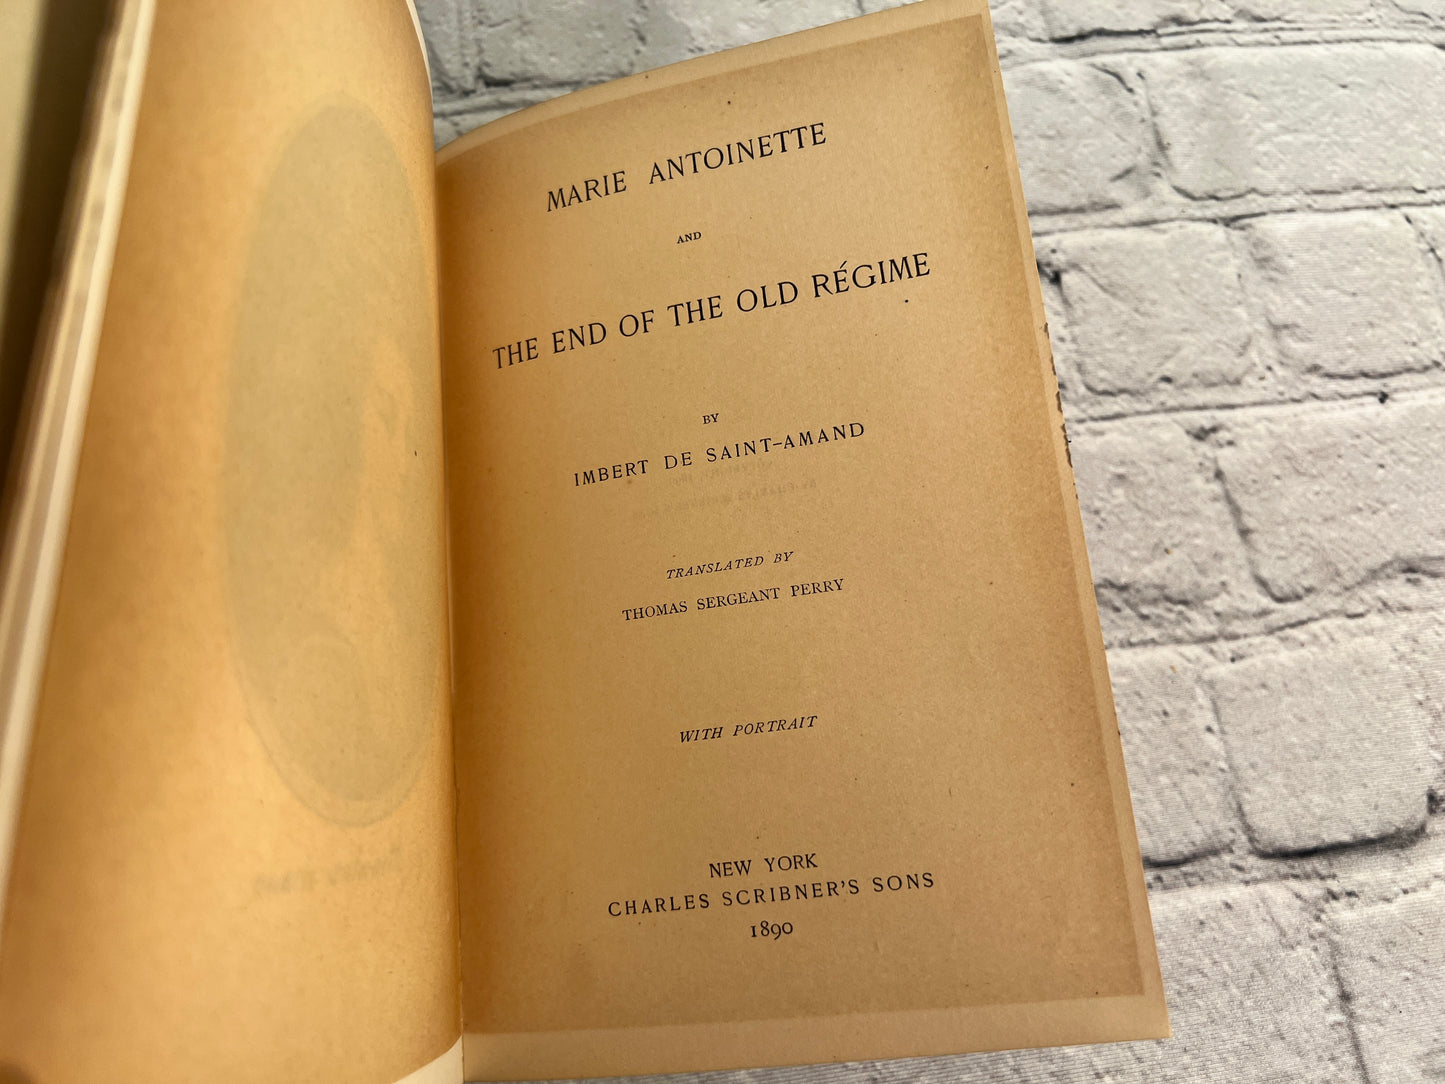 Marie Antoinette and the End of the Old Regime by Imbert de Saint-Amand [1890]